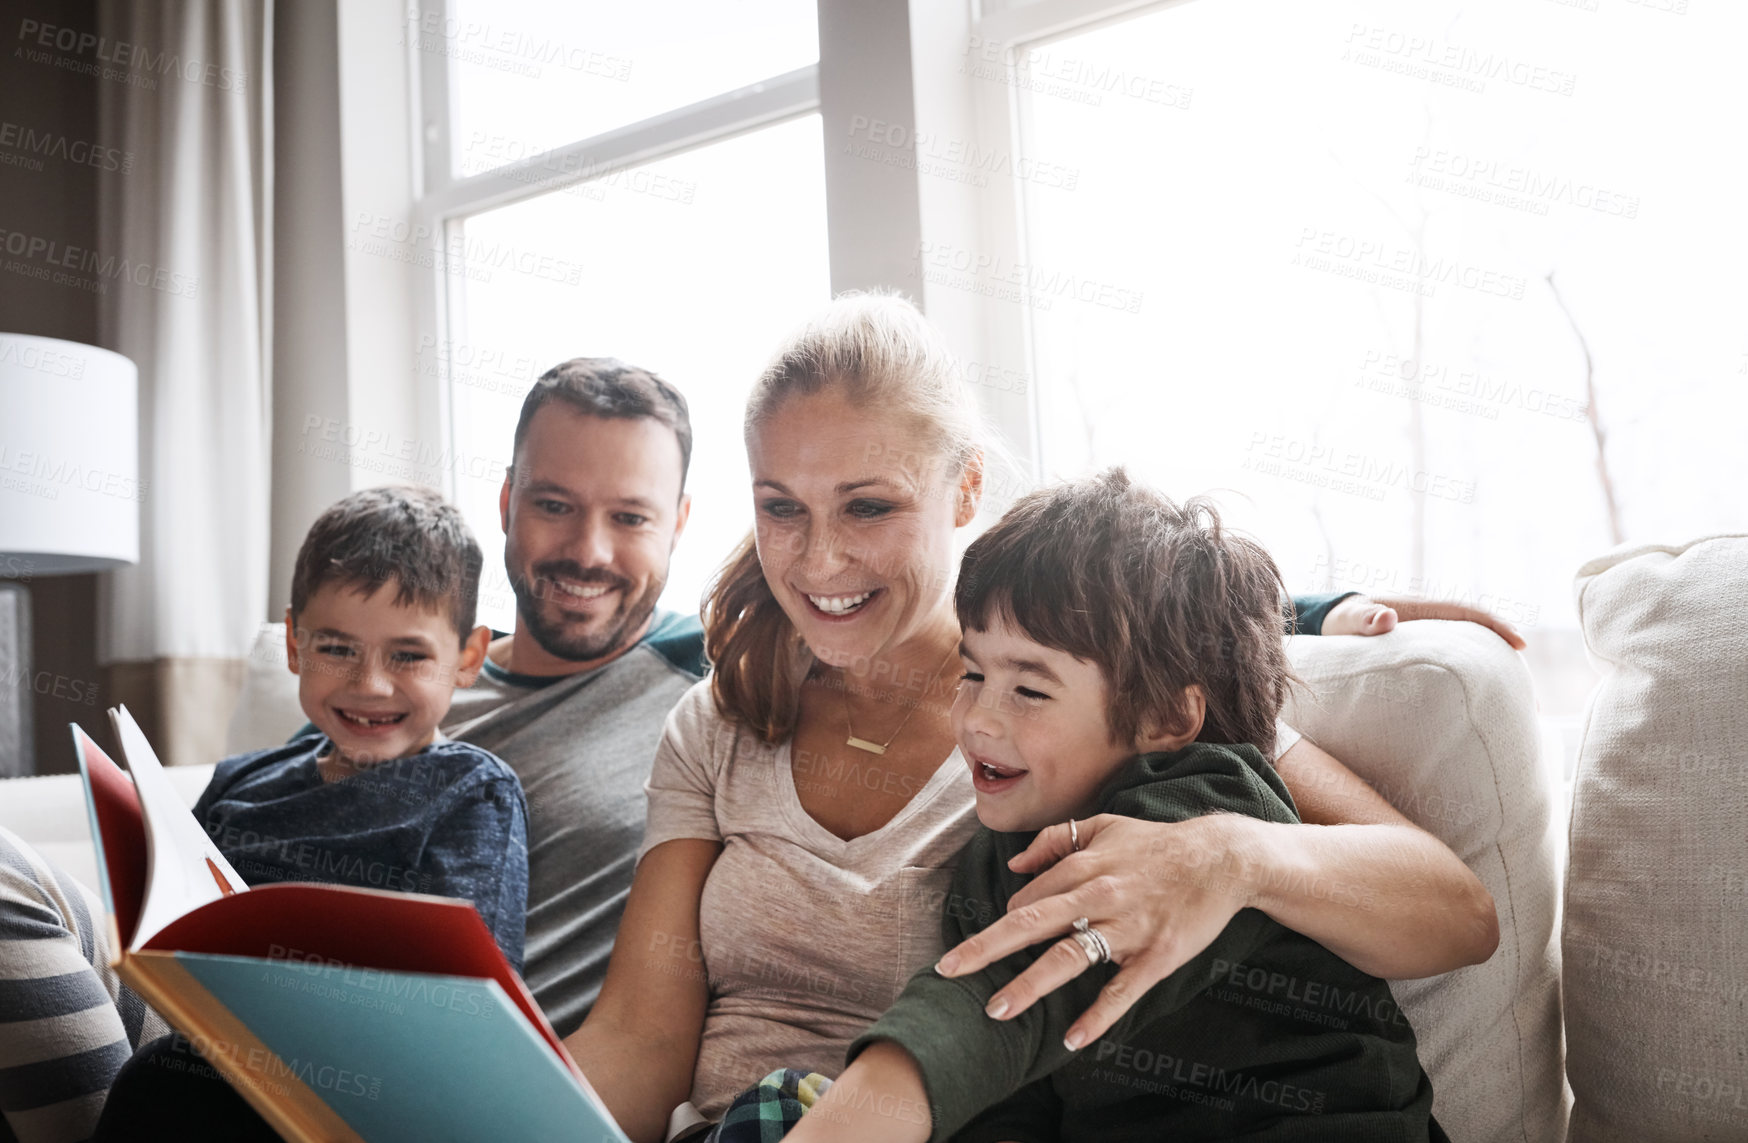 Buy stock photo Shot of two adorable brothers reading a book together with their parents while relaxing on the sofa at home